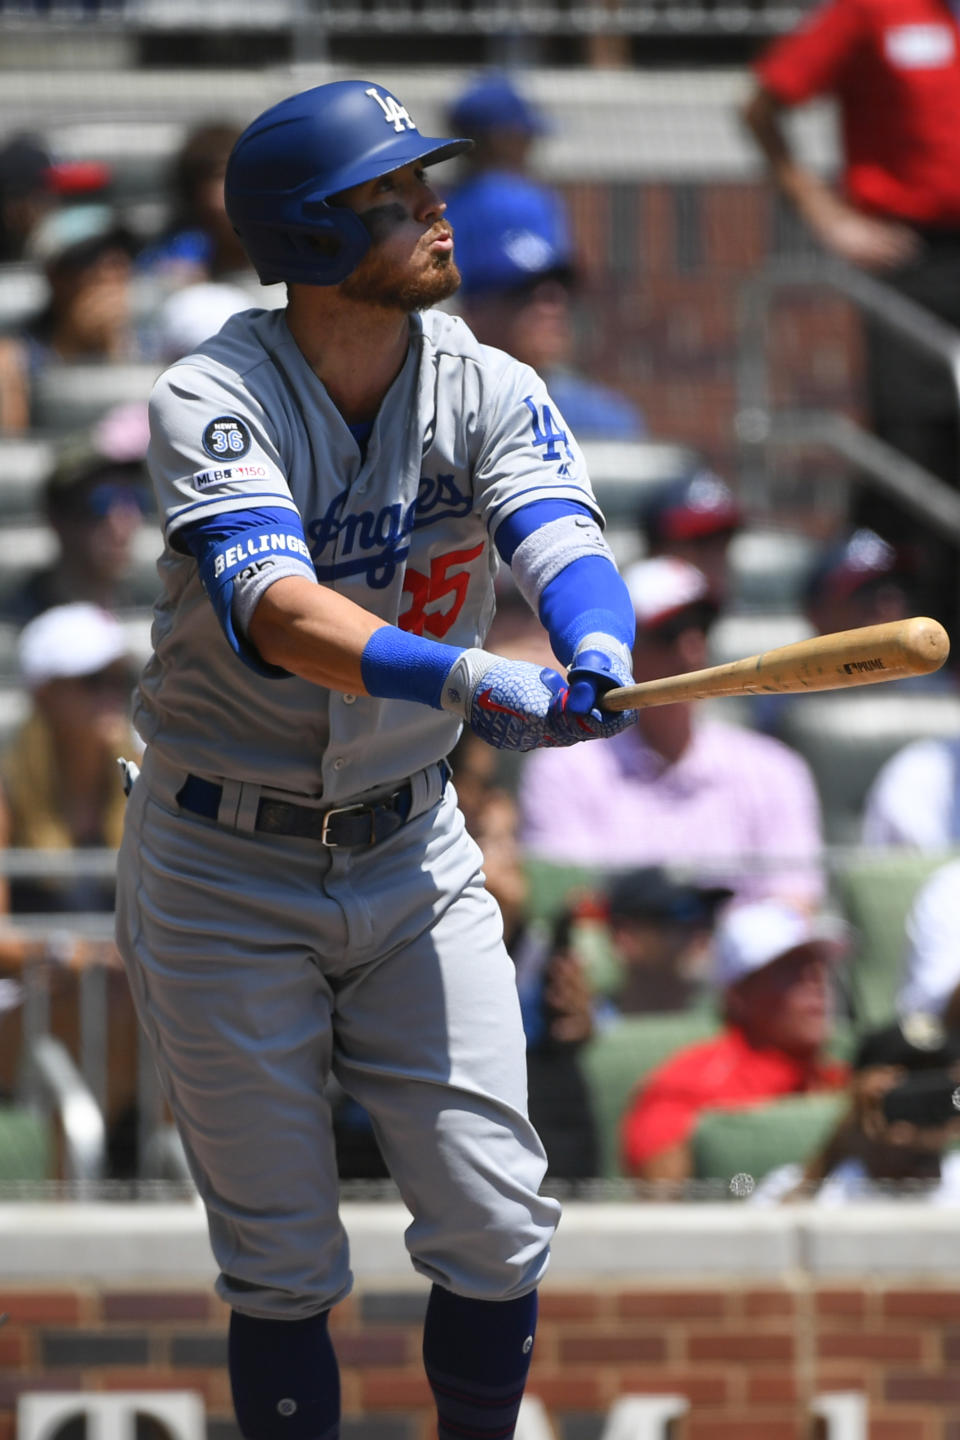 Los Angeles Dodgers' Cody Bellinger watches his three-run home run sail over center field during the first inning of a baseball game against the Atlanta Braves, Sunday, Aug. 18, 2019, in Atlanta. (AP Photo/John Amis)